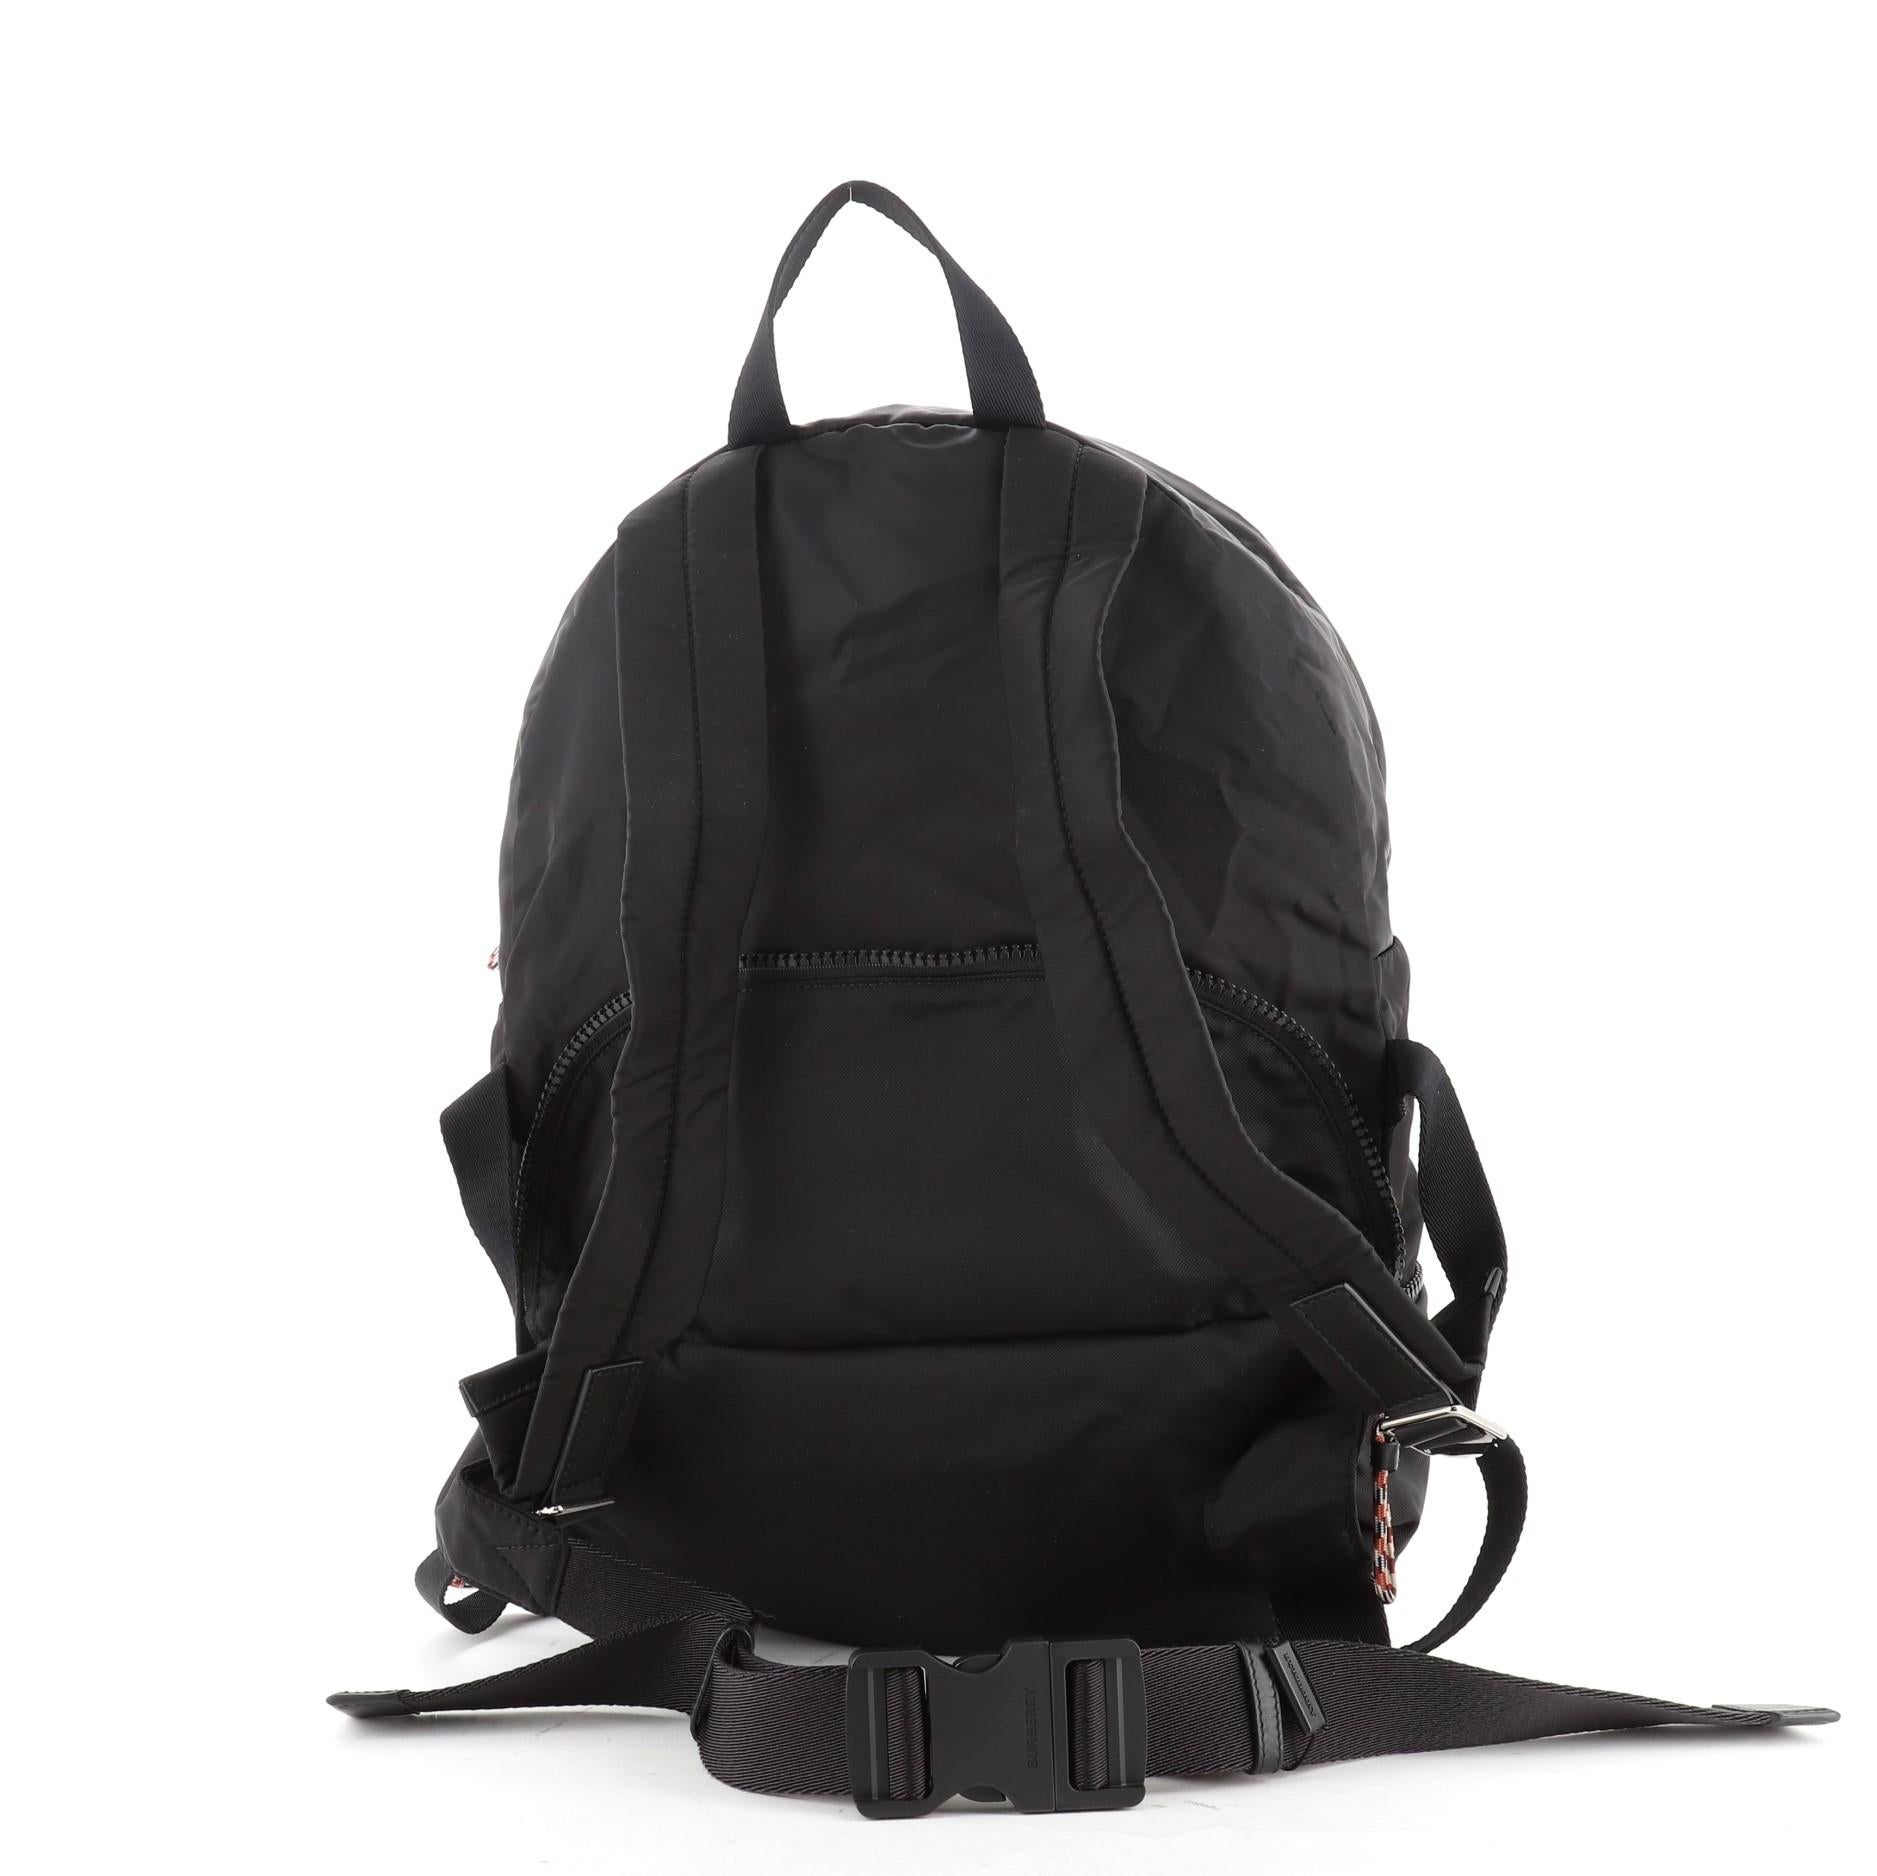 Burberry Convertible Backpack Nylon Medium
Black Nylon

Condition Details: Scratches on hardware.

45024MSC

Height 10